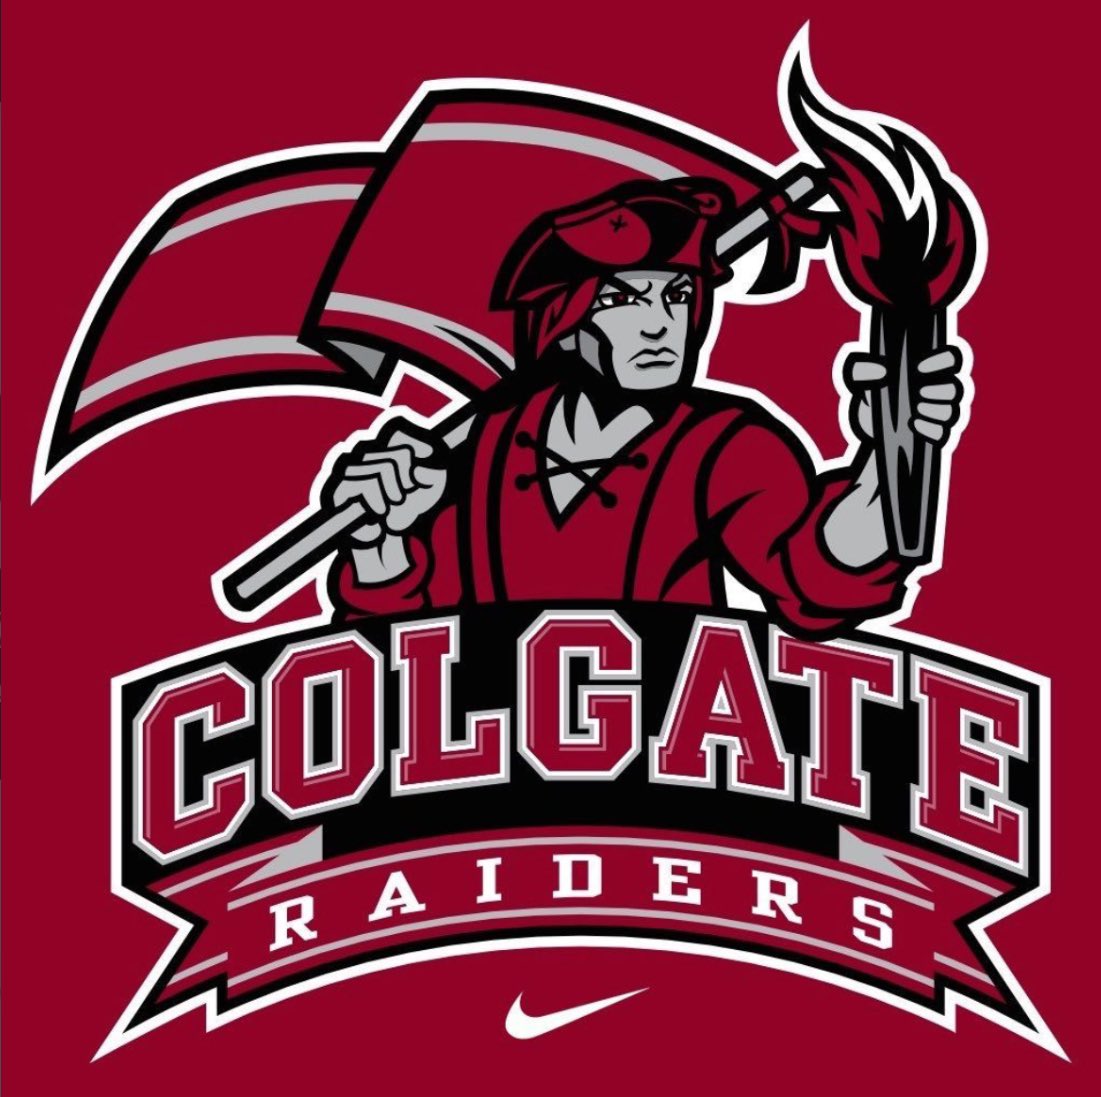 #AGTG After a great talk with @CoachBelfiori I am blessed to say i’ve received my 10th division 1 offer from Colgate University @CoachJacksonAQ @RyanButtles @AQ_football @AqStrength @SecVFootball @DaveEustis @PrimetimeBall_